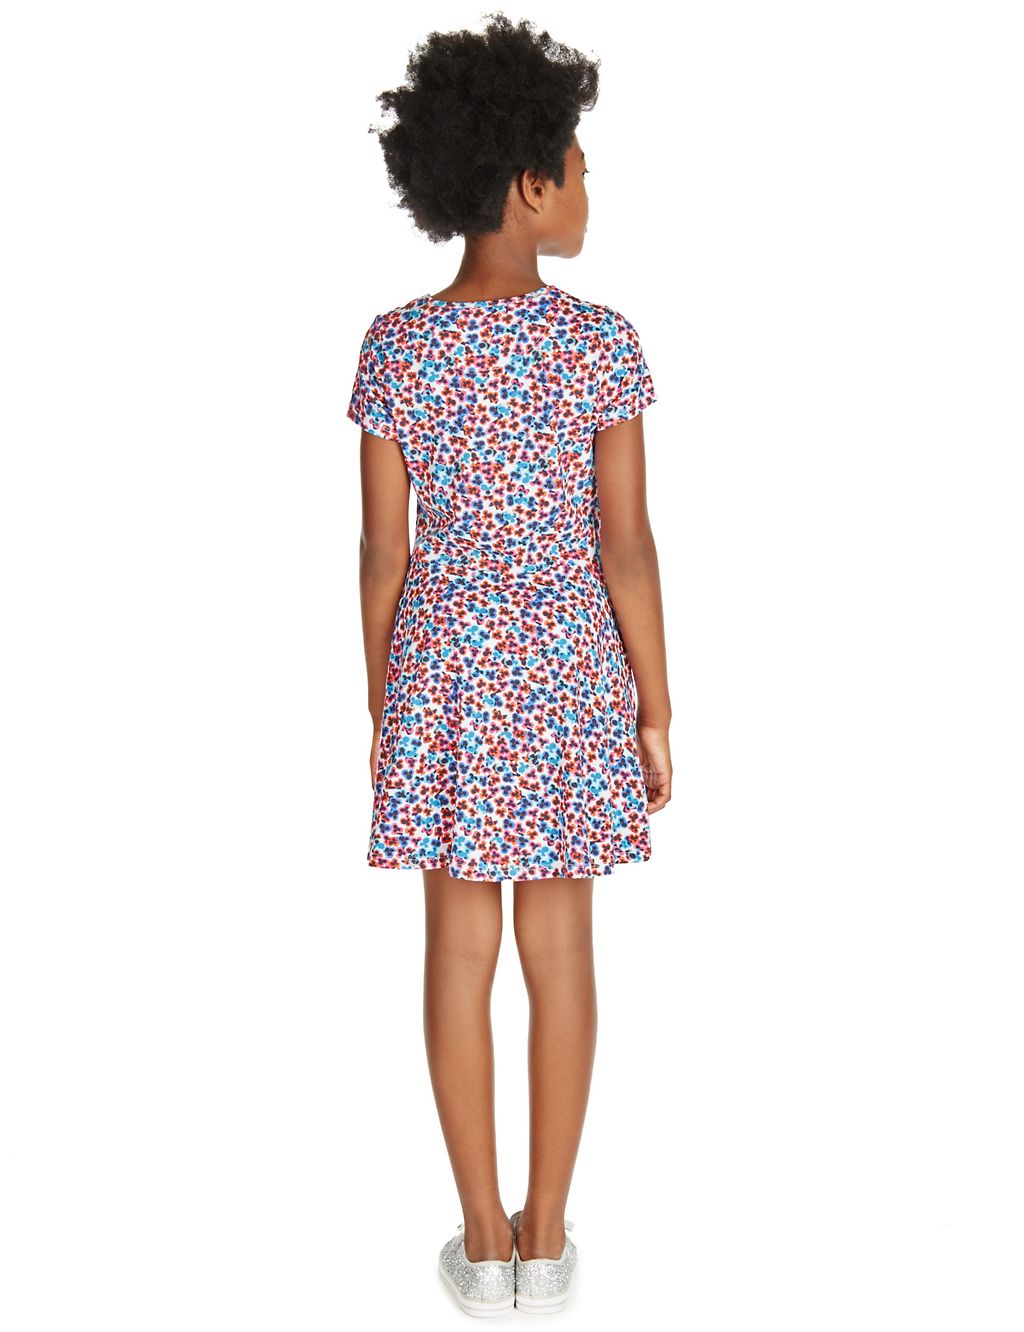 Cotton Rich Floral Dress (5-14 Years) 2 of 3